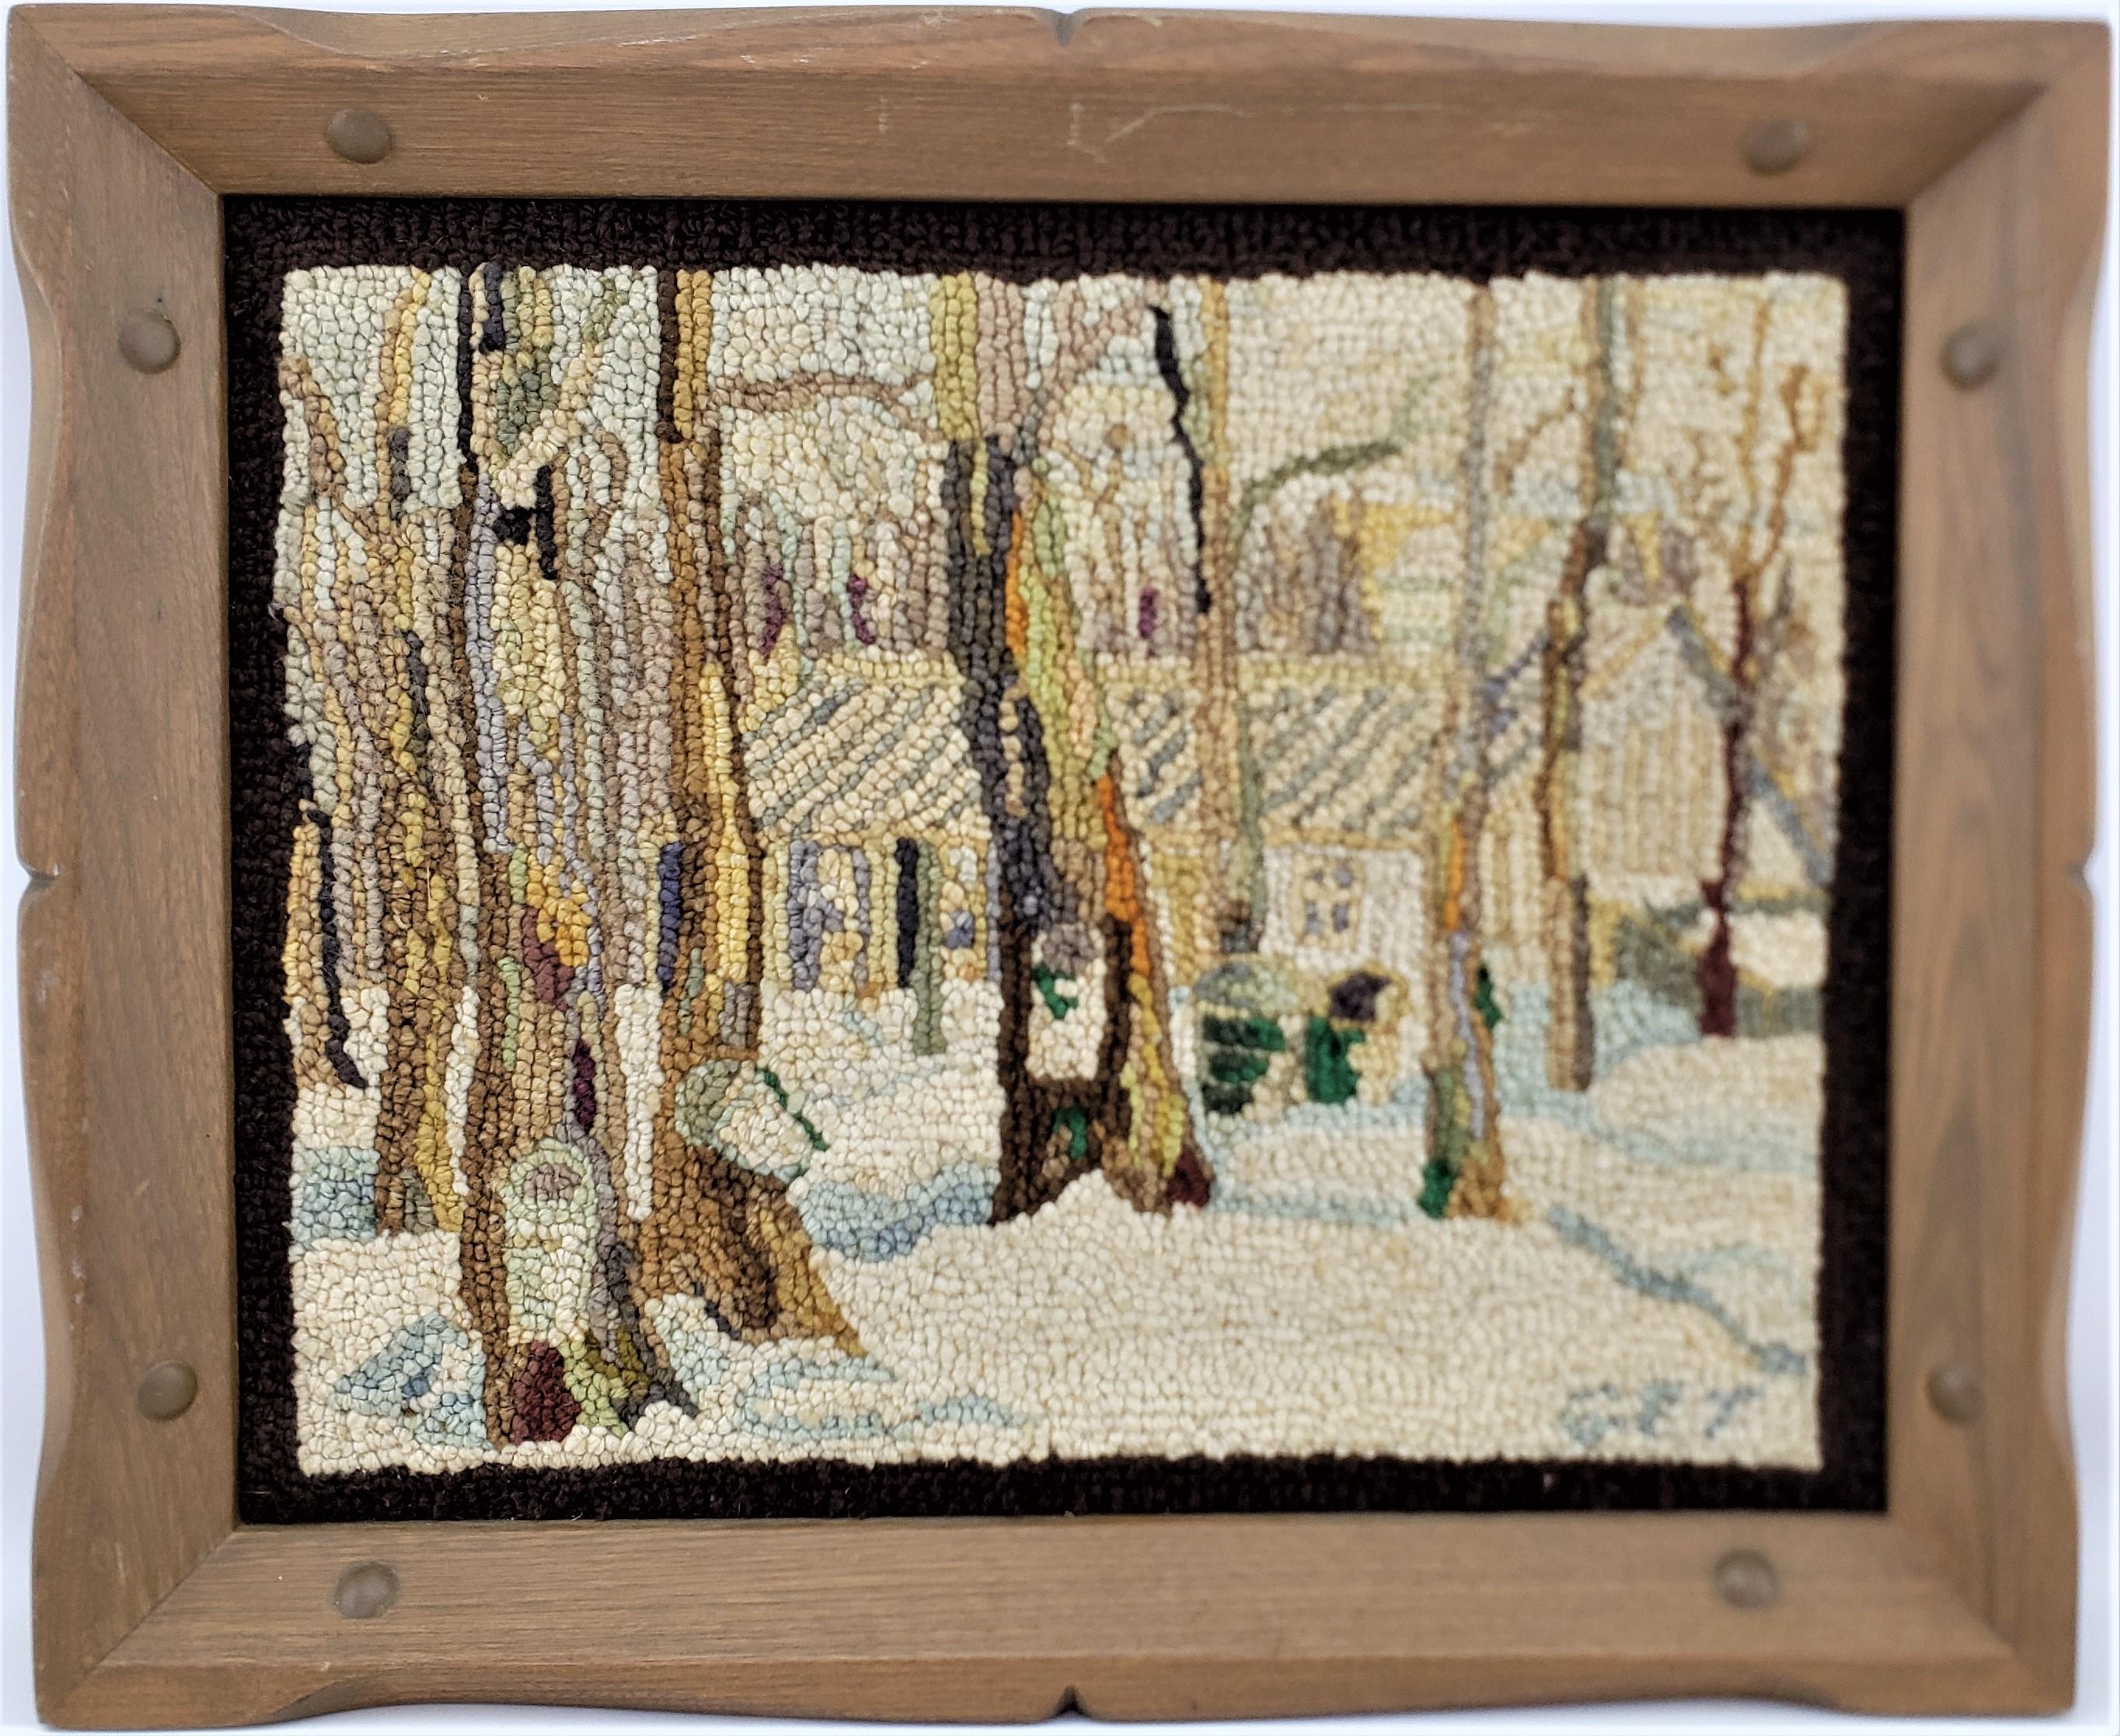 This framed hooked rug or mat was done by the well known George Edouard Tremblay of Quebec Canada in approximately 1940 in his period Folk Art style. The rug or mat is done with wool, presumably on burlap and framed in a rustic styled wooden frame.